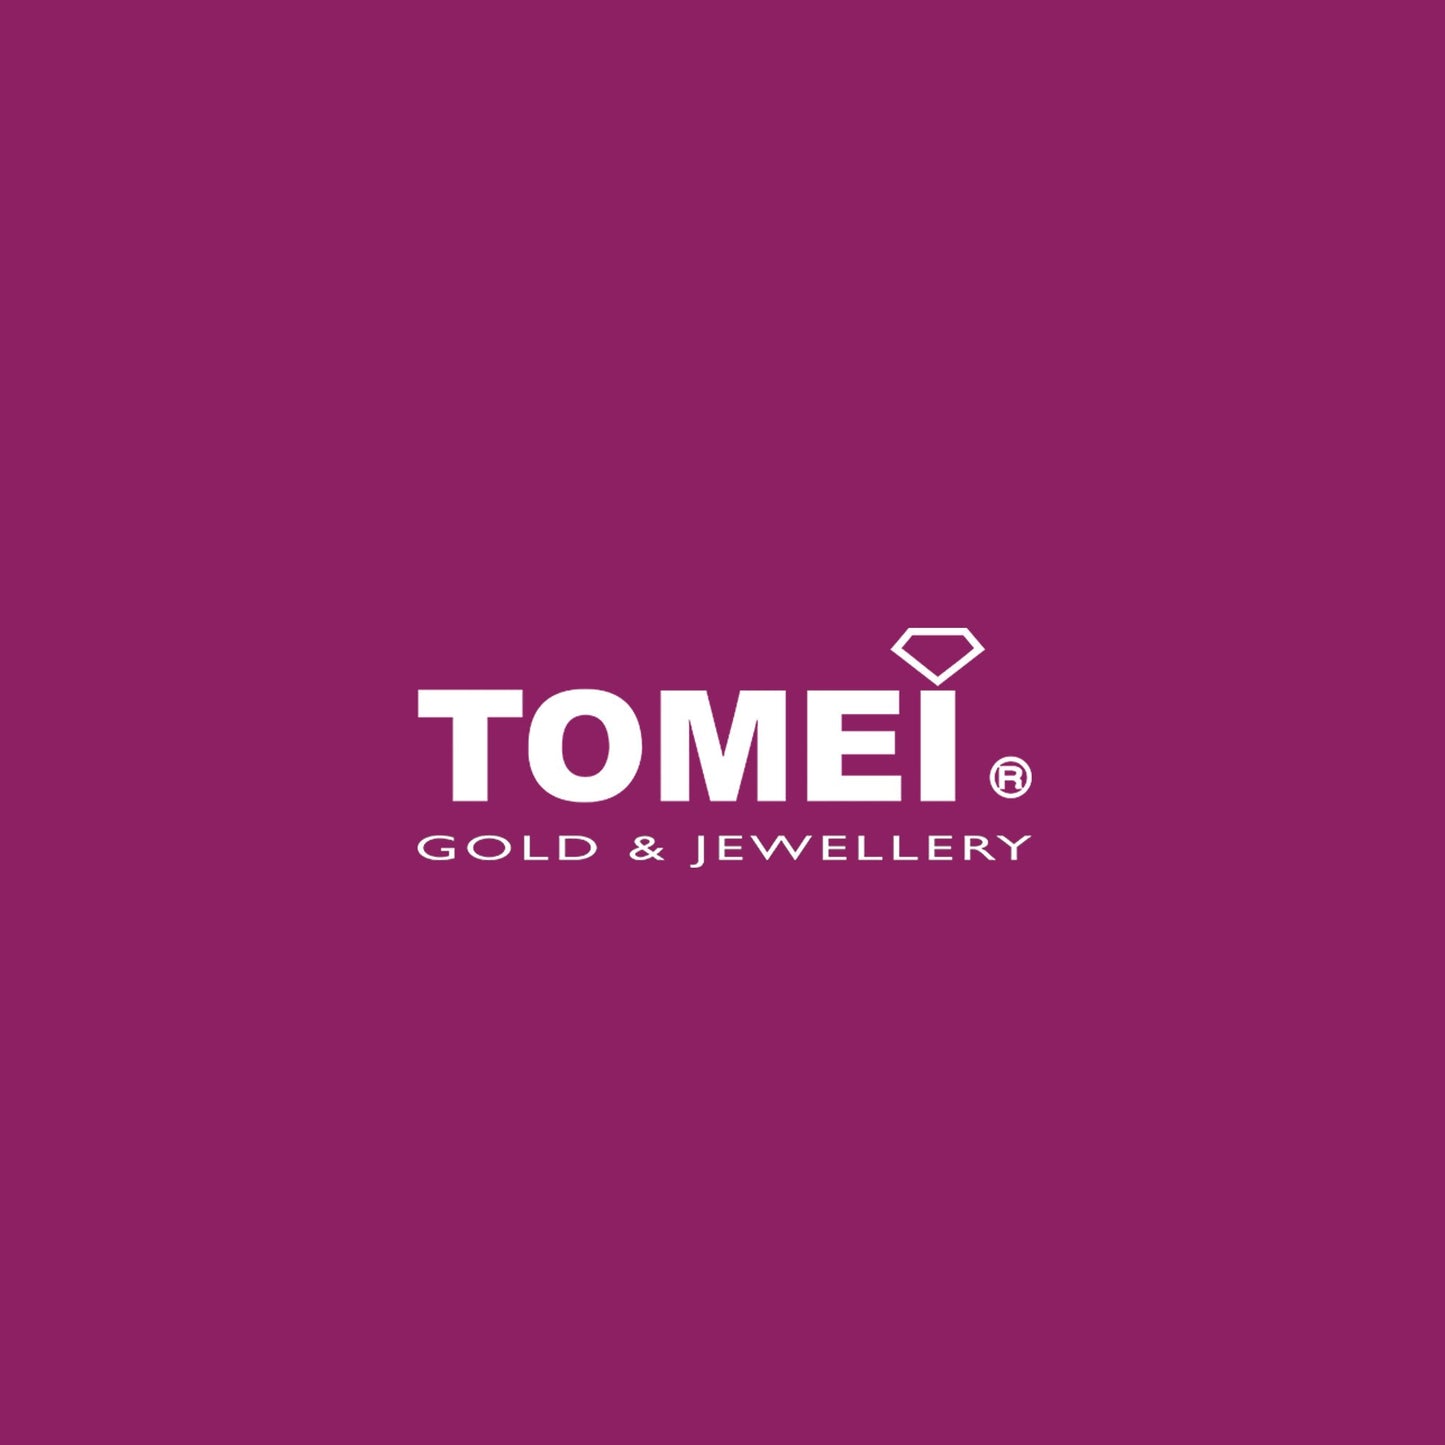 TOMEI x My Melody with Red Heart Pendant, Yellow Gold 916